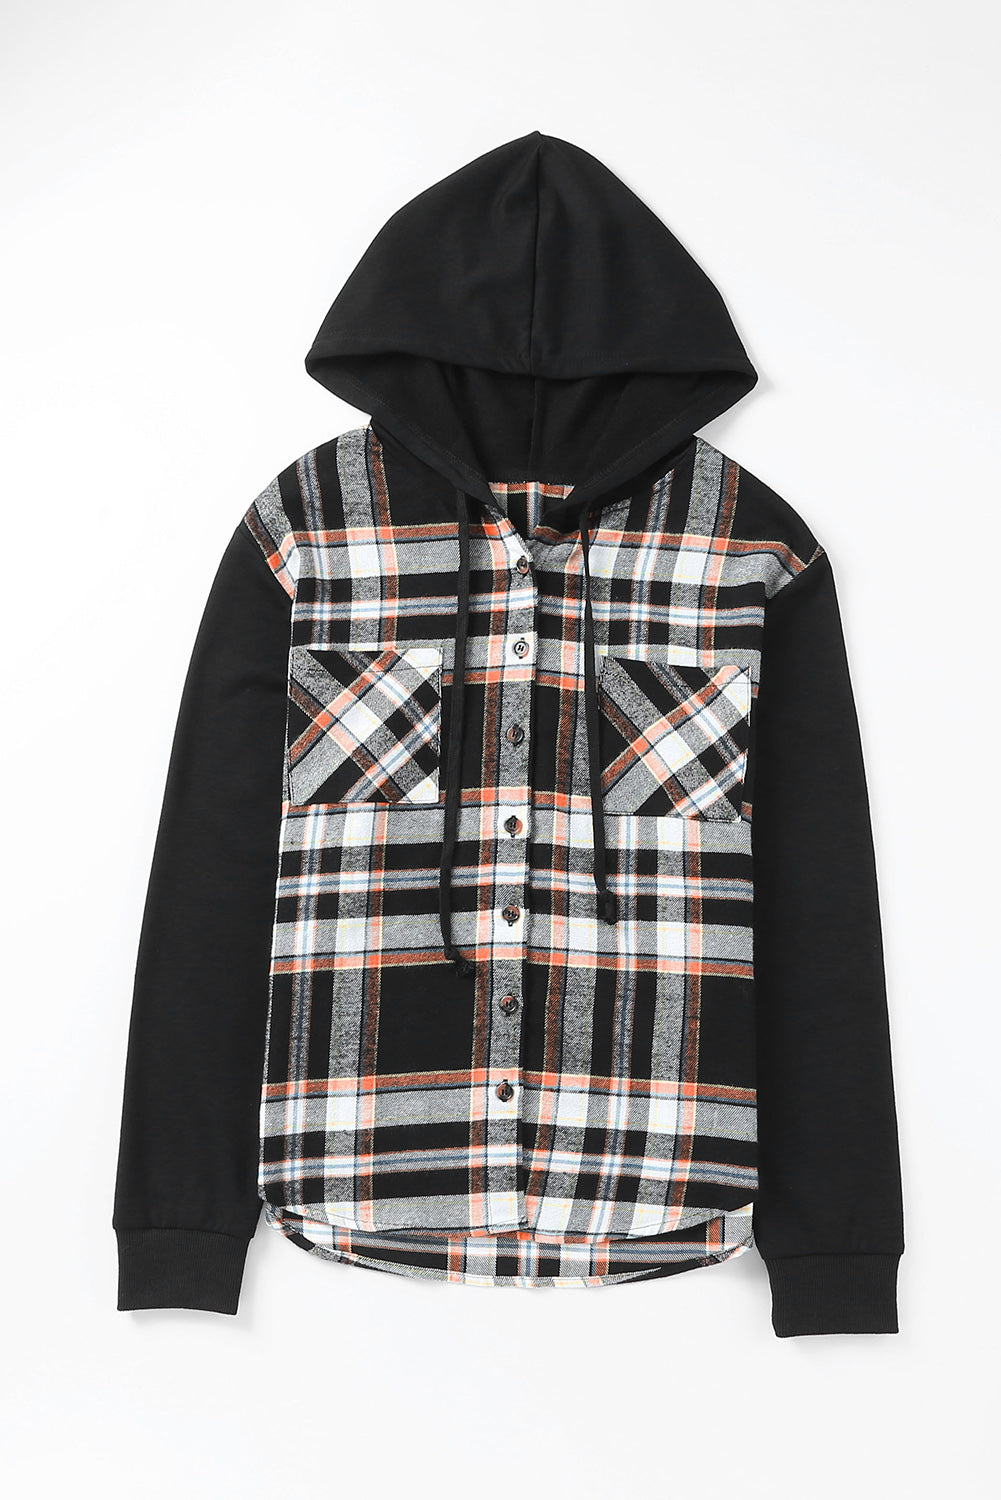 Black Plaid Buttons Long Sleeve Hooded Jacket